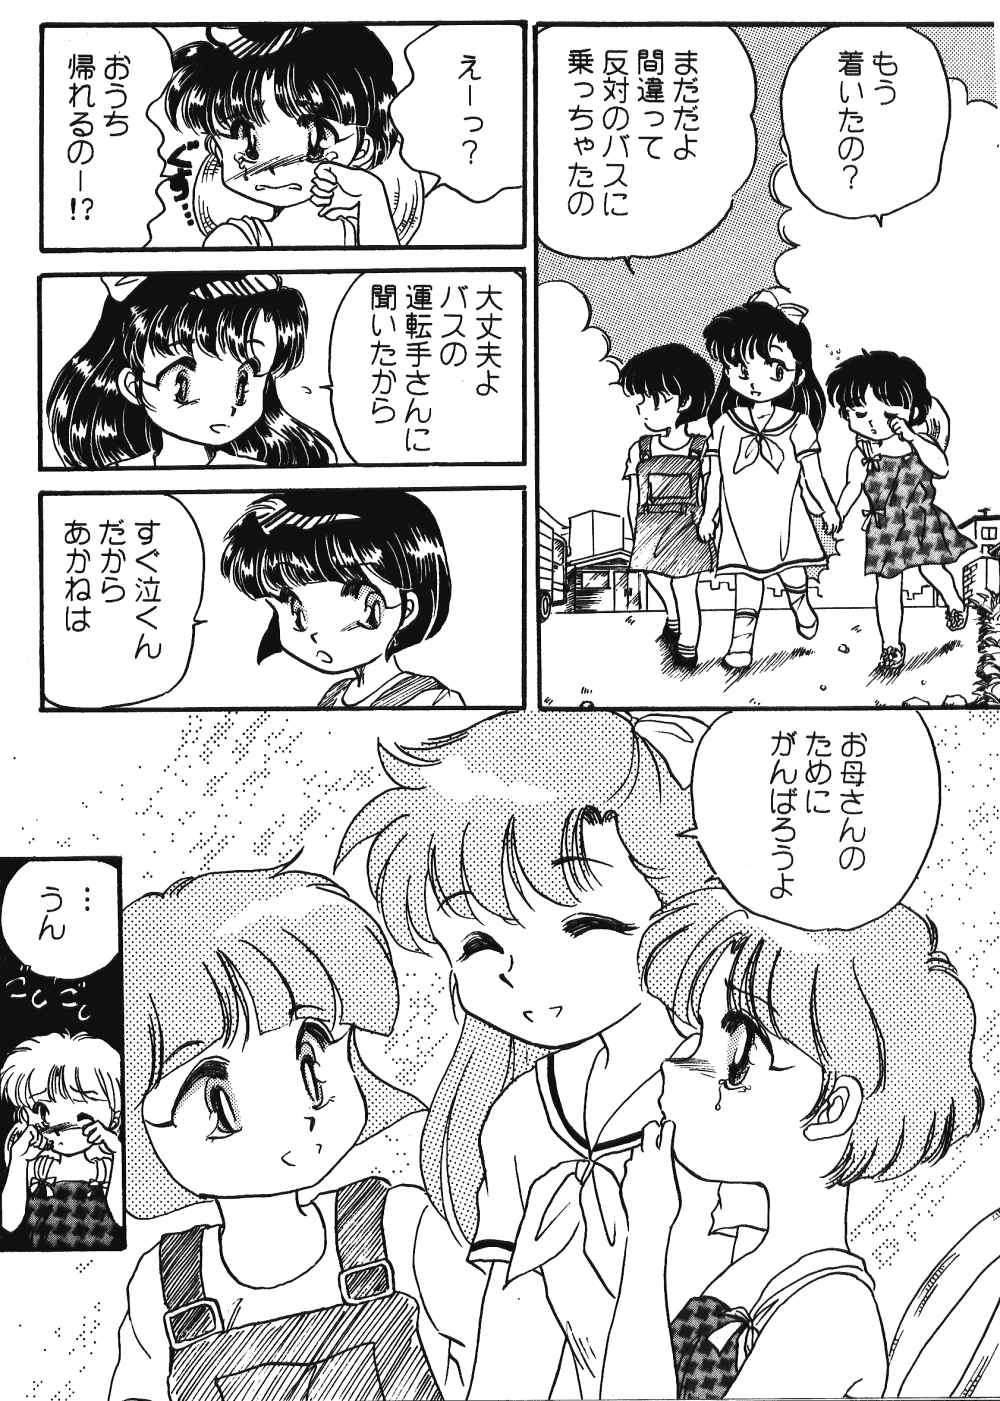 Never Forget Summer (Ranma 1/2) 10